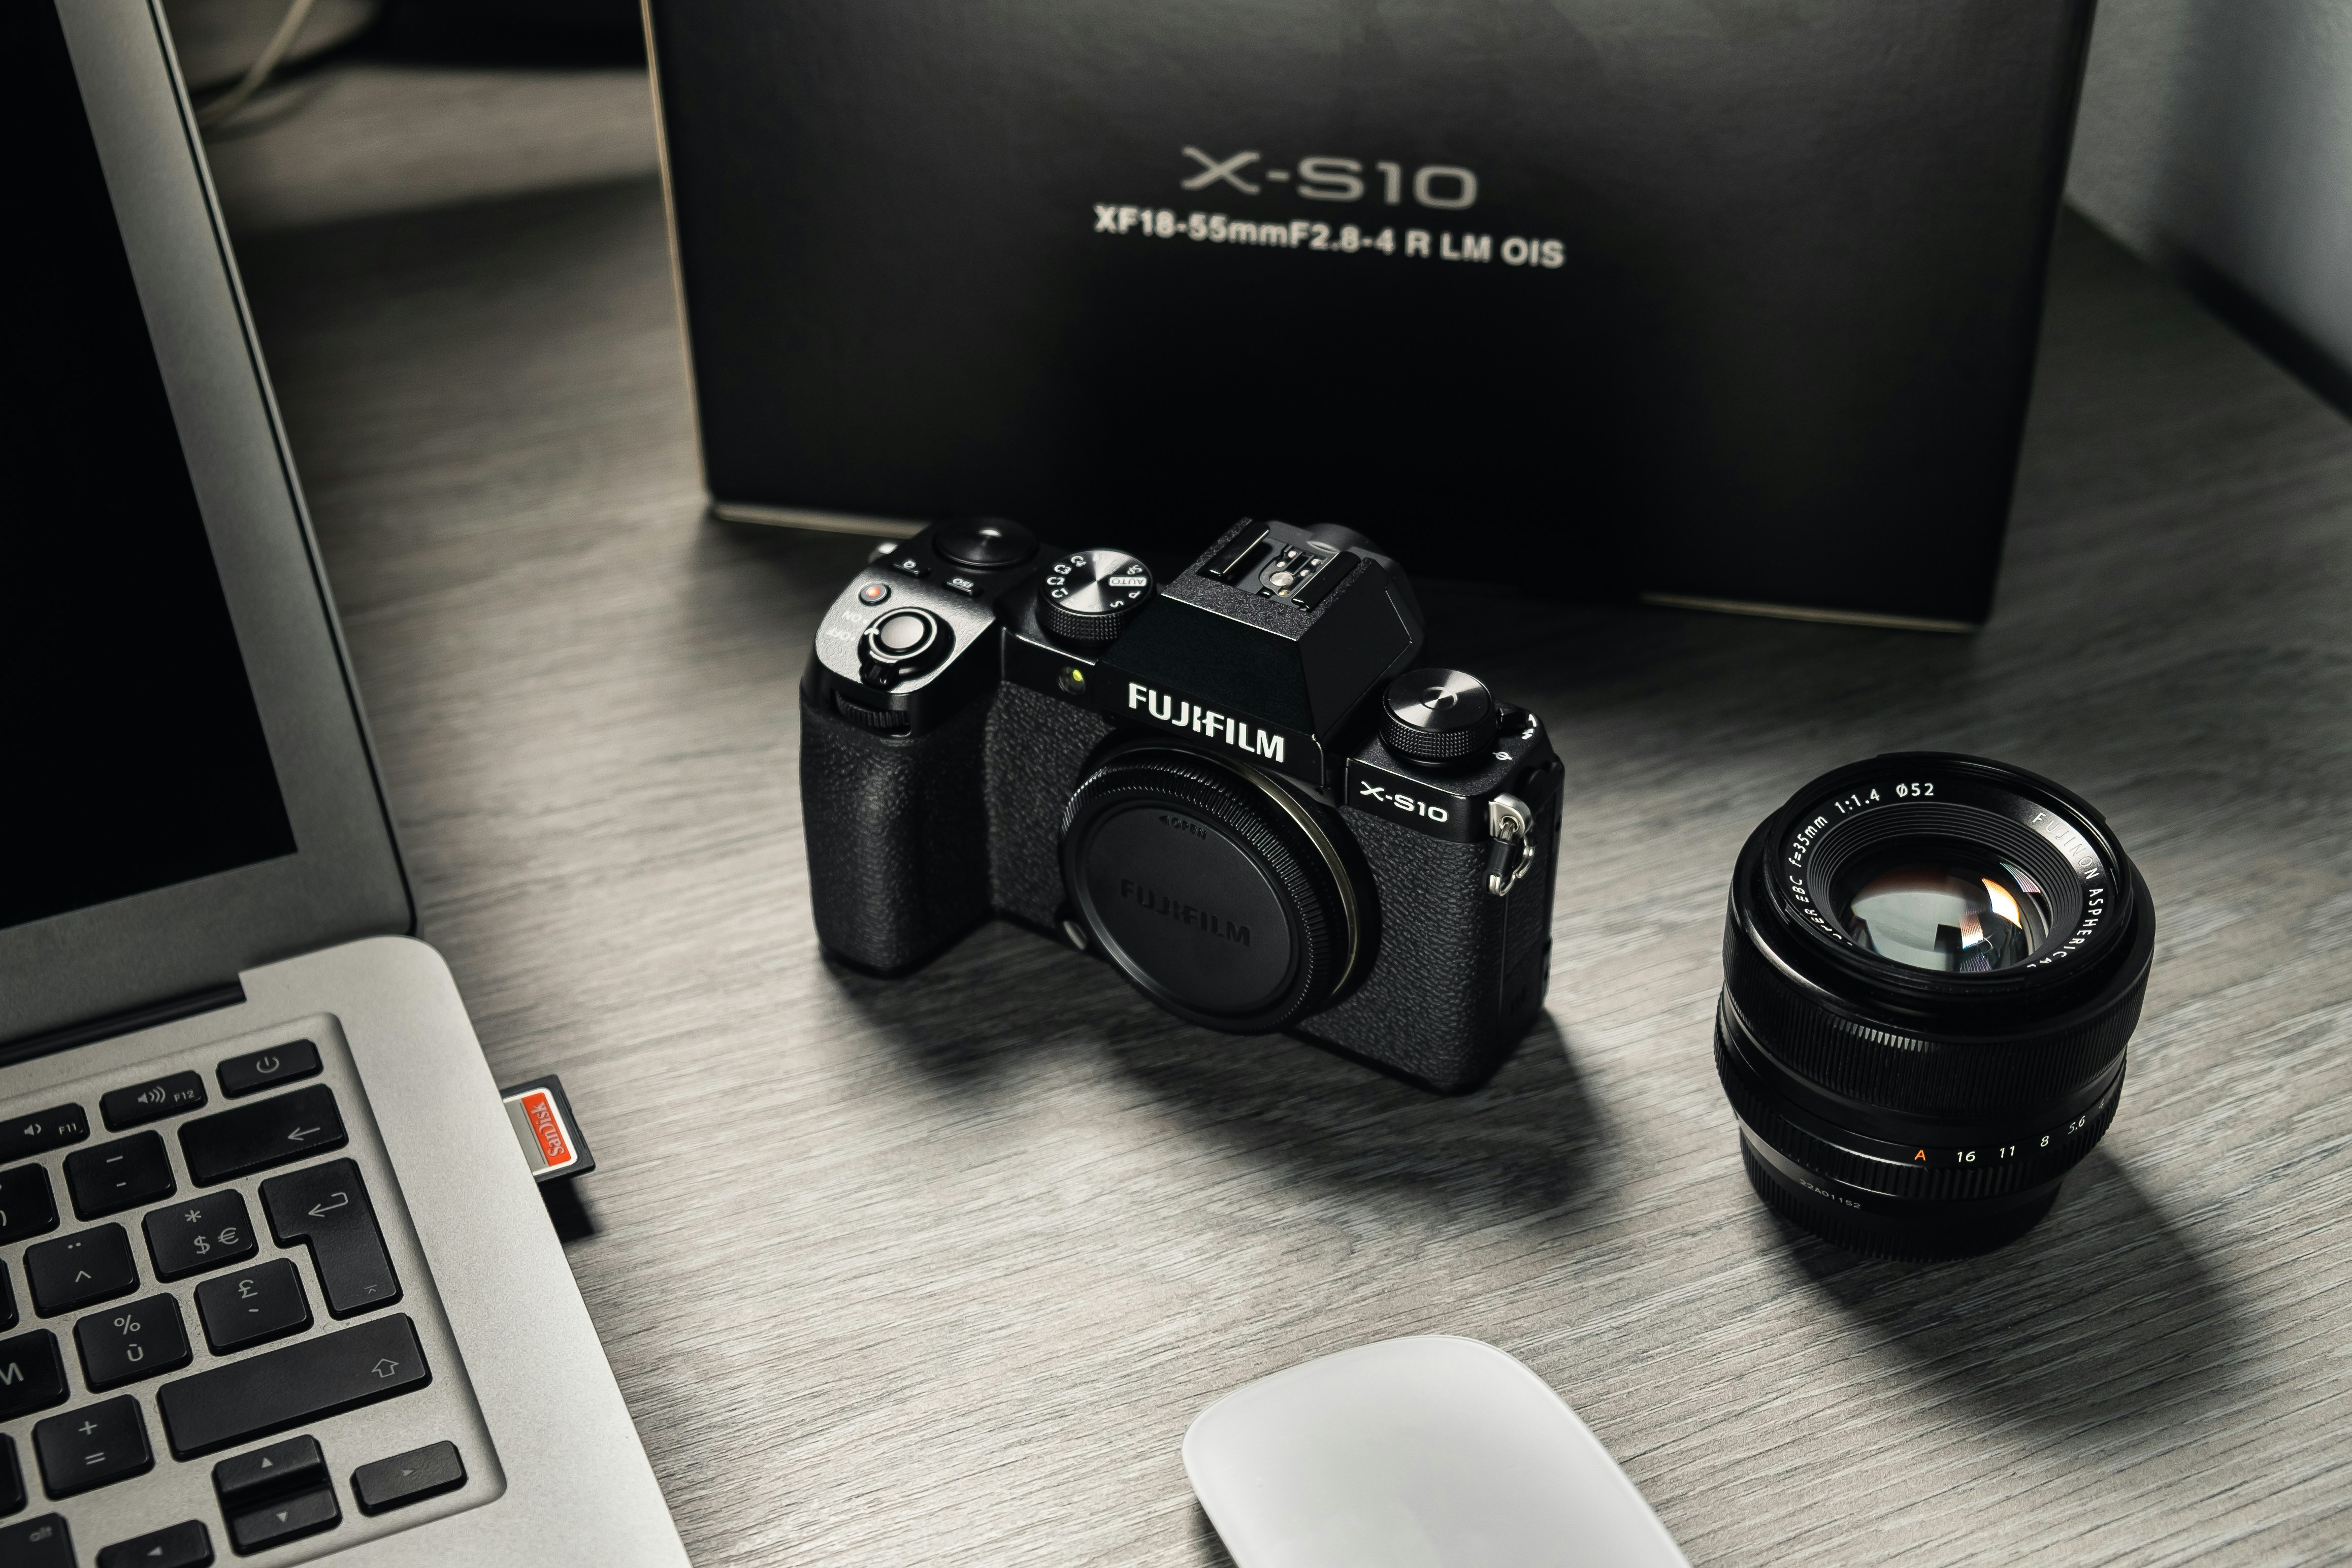 Fujifilm X-S10 product photo, created for review purposes. IG @kenny.leys for more :-)